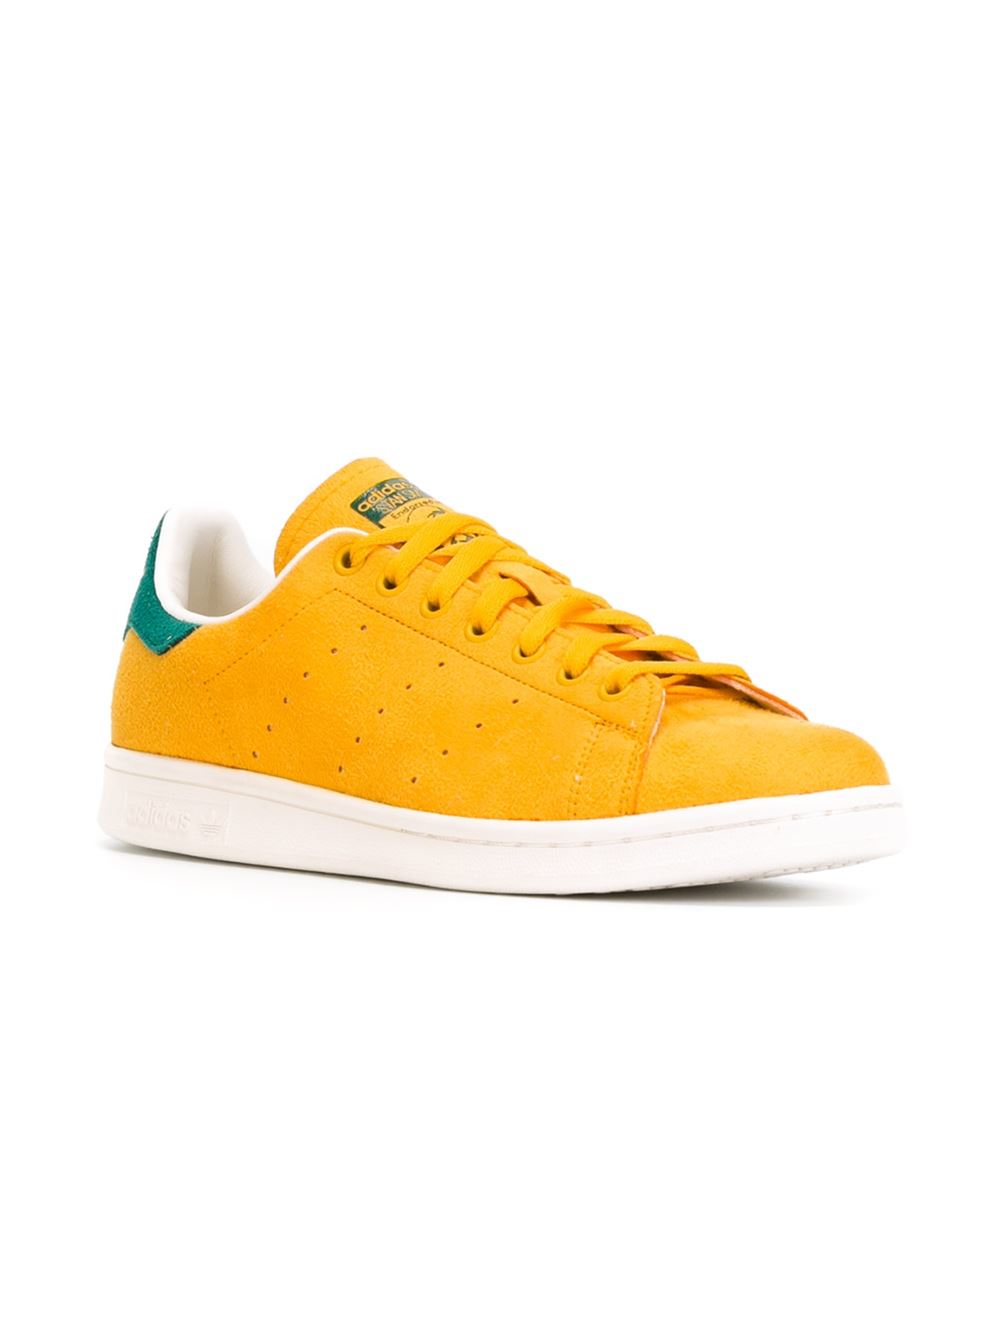 adidas Originals 'stan Smith' Sneakers in Yellow & Orange (Yellow) for ...